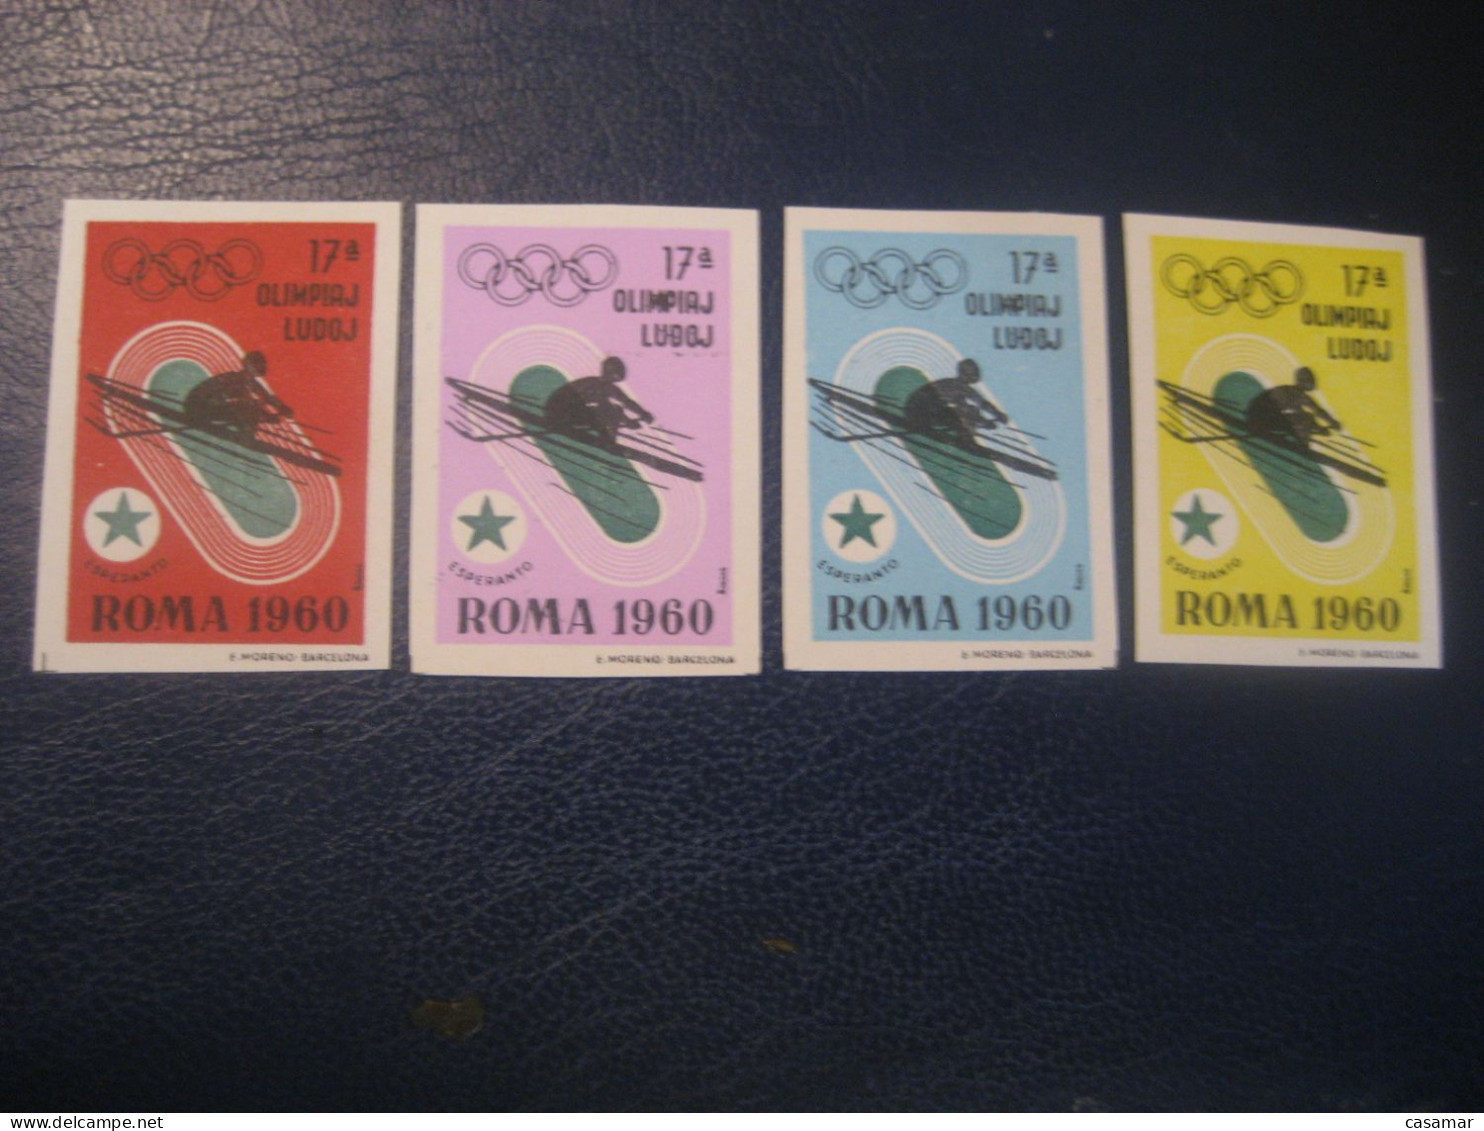 ROMA 1960 Rowing Aviron Olympic Games Olympics Esperanto 4 Imperforated Poster Stamp Vignette ITALY Spain Label - Rudersport